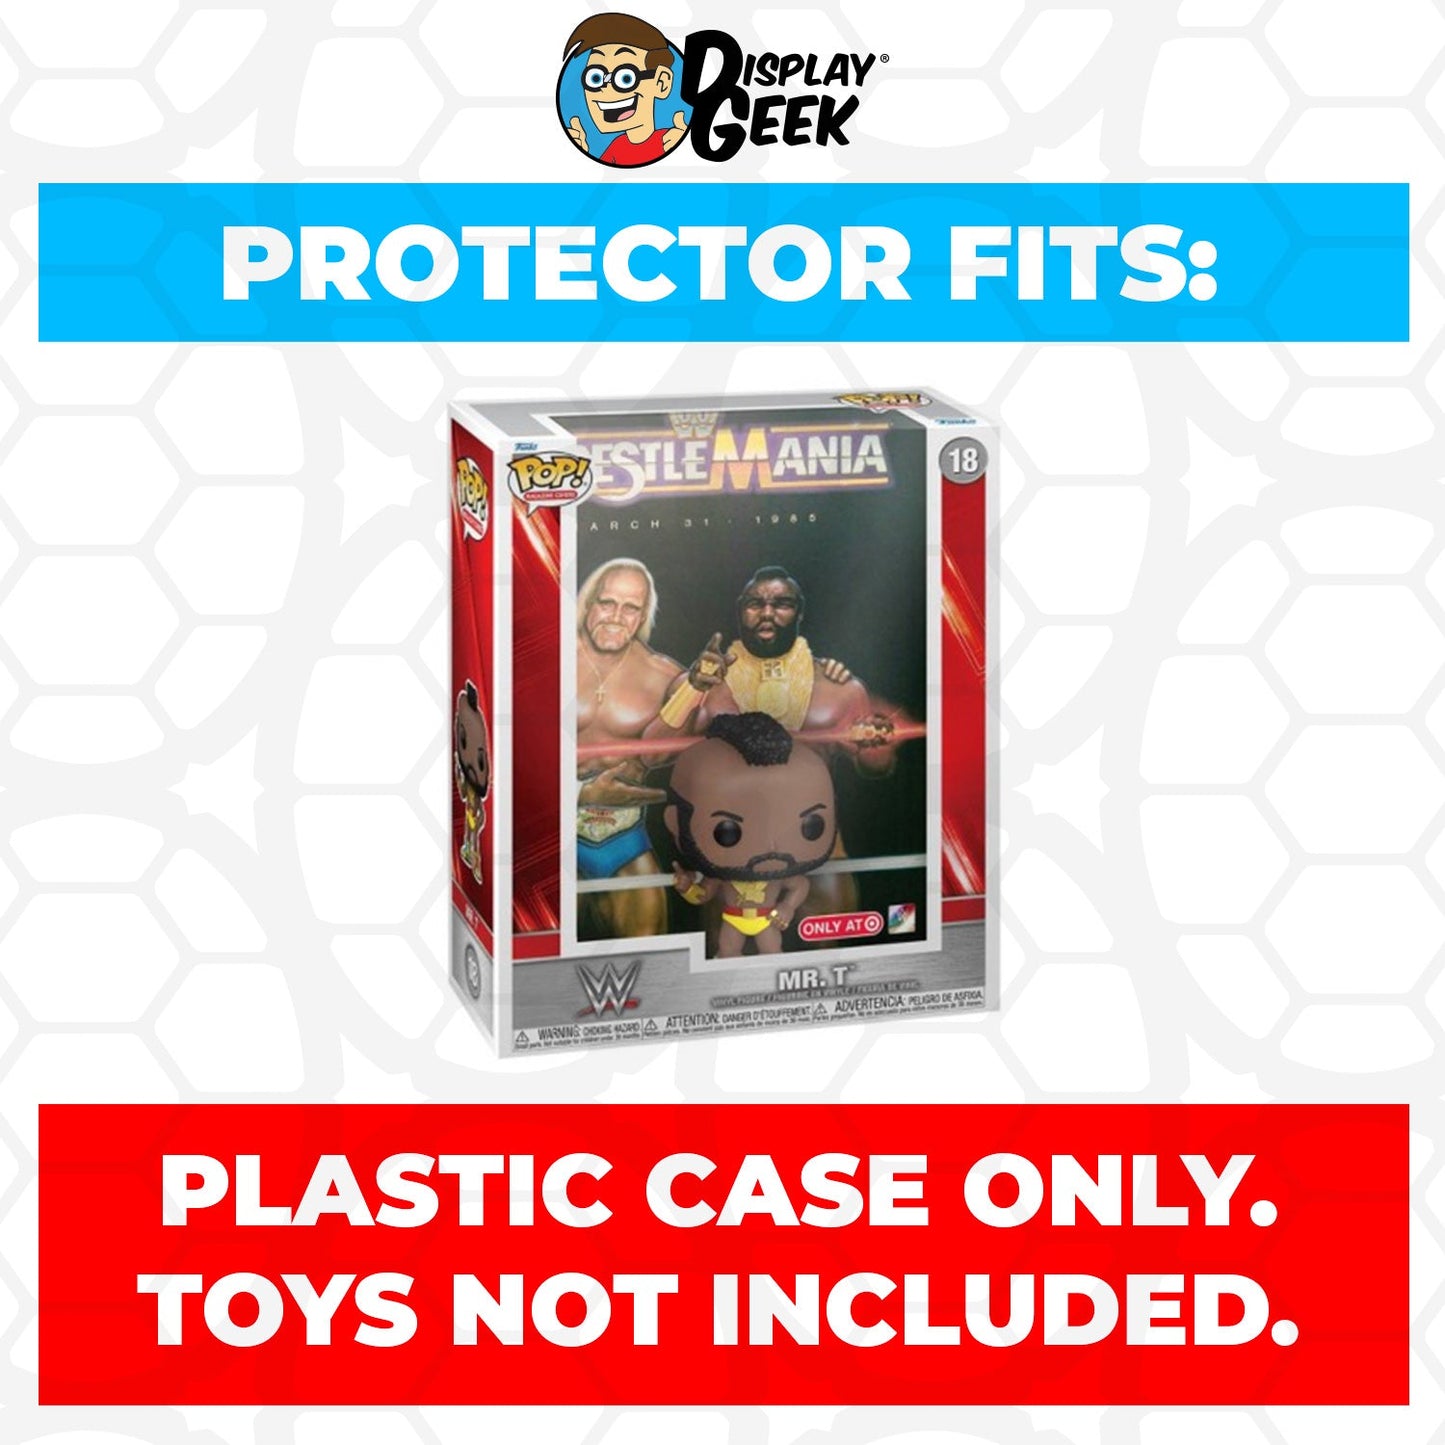 Pop Protector for Mr. T #18 WWE Funko Pop Magazine Covers - PPG Pop Protector Guide Search Created by Display Geek